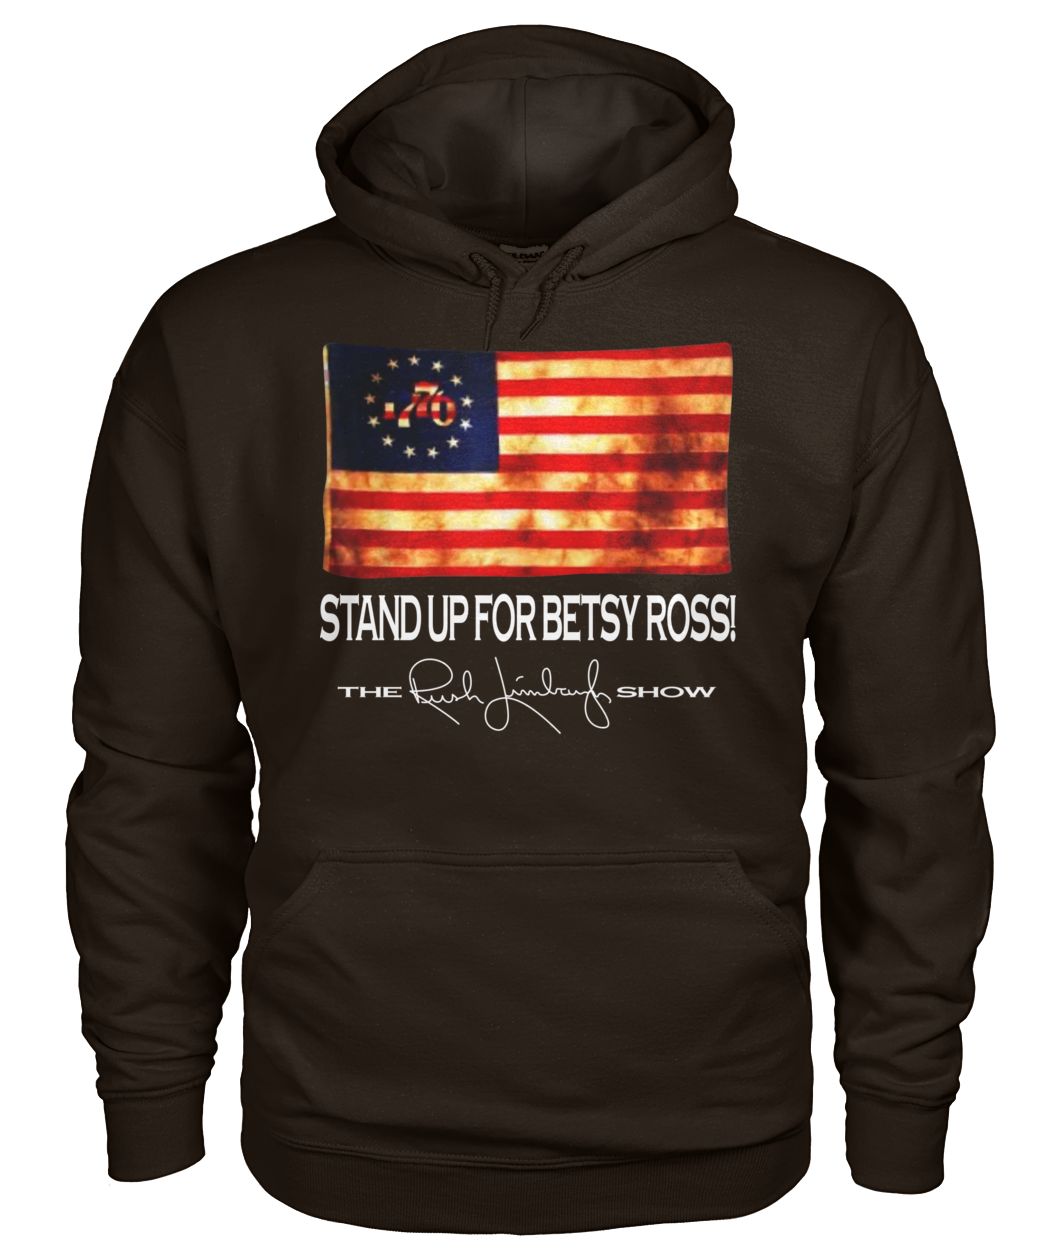 Stand up for betsy ross 1776 american flag gildan hoodie